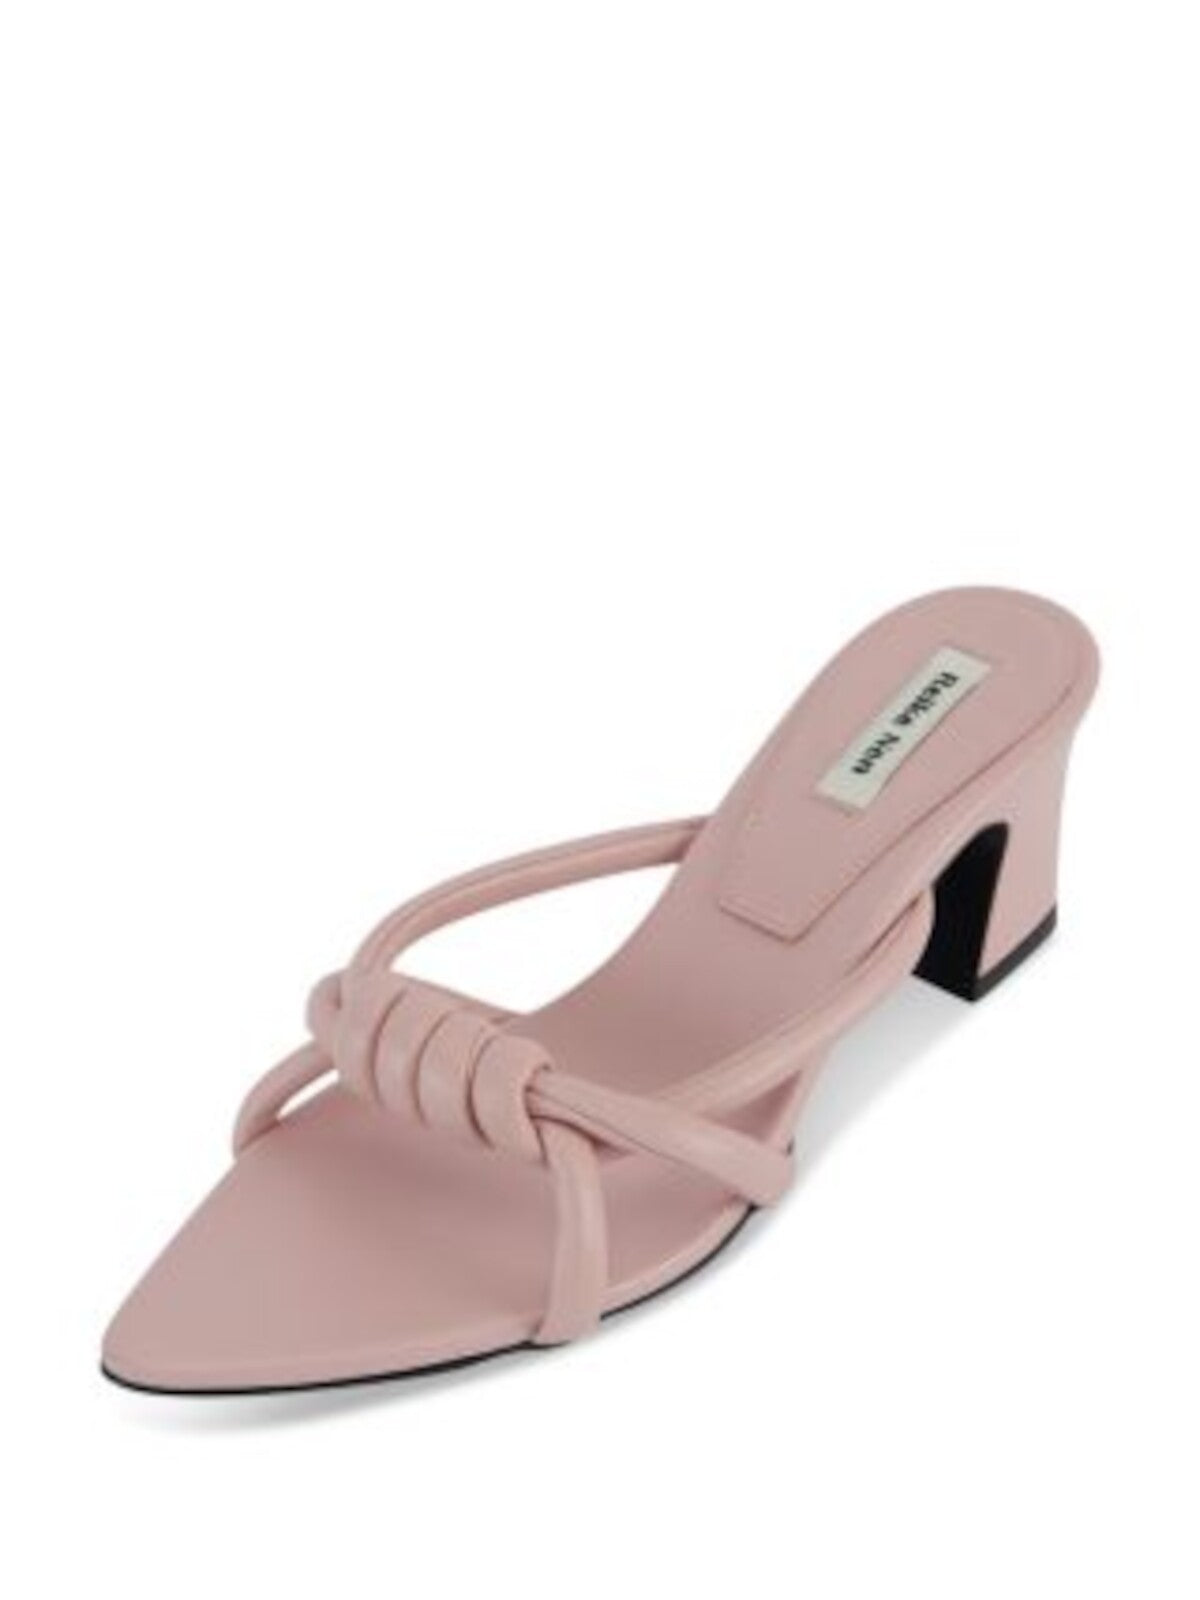 REIKE NEN Womens Pink Knotted Strap Logo Footbed Logo Rn3sh006 Pointed Toe Block Heel Slip On Leather Heeled Sandal 40